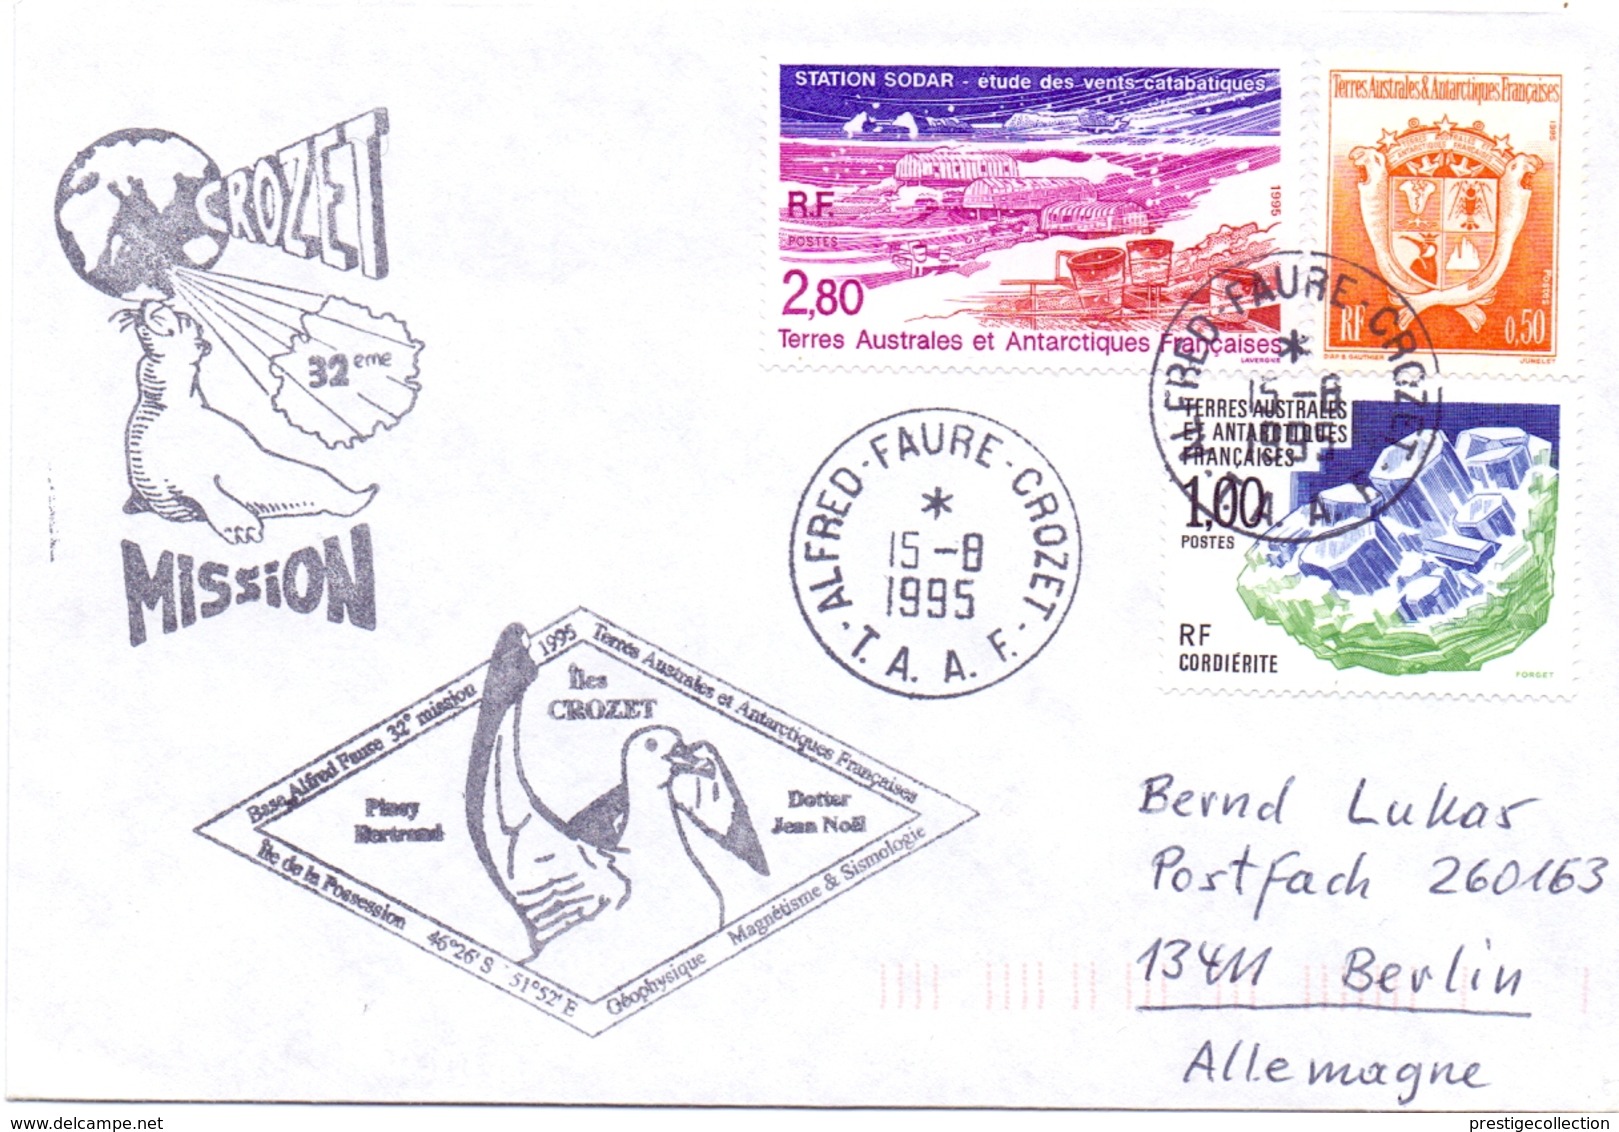 TAAF 1995 MISSION ALFRED FAURE CROZET  COVER  (DICE180001) - Preserve The Polar Regions And Glaciers